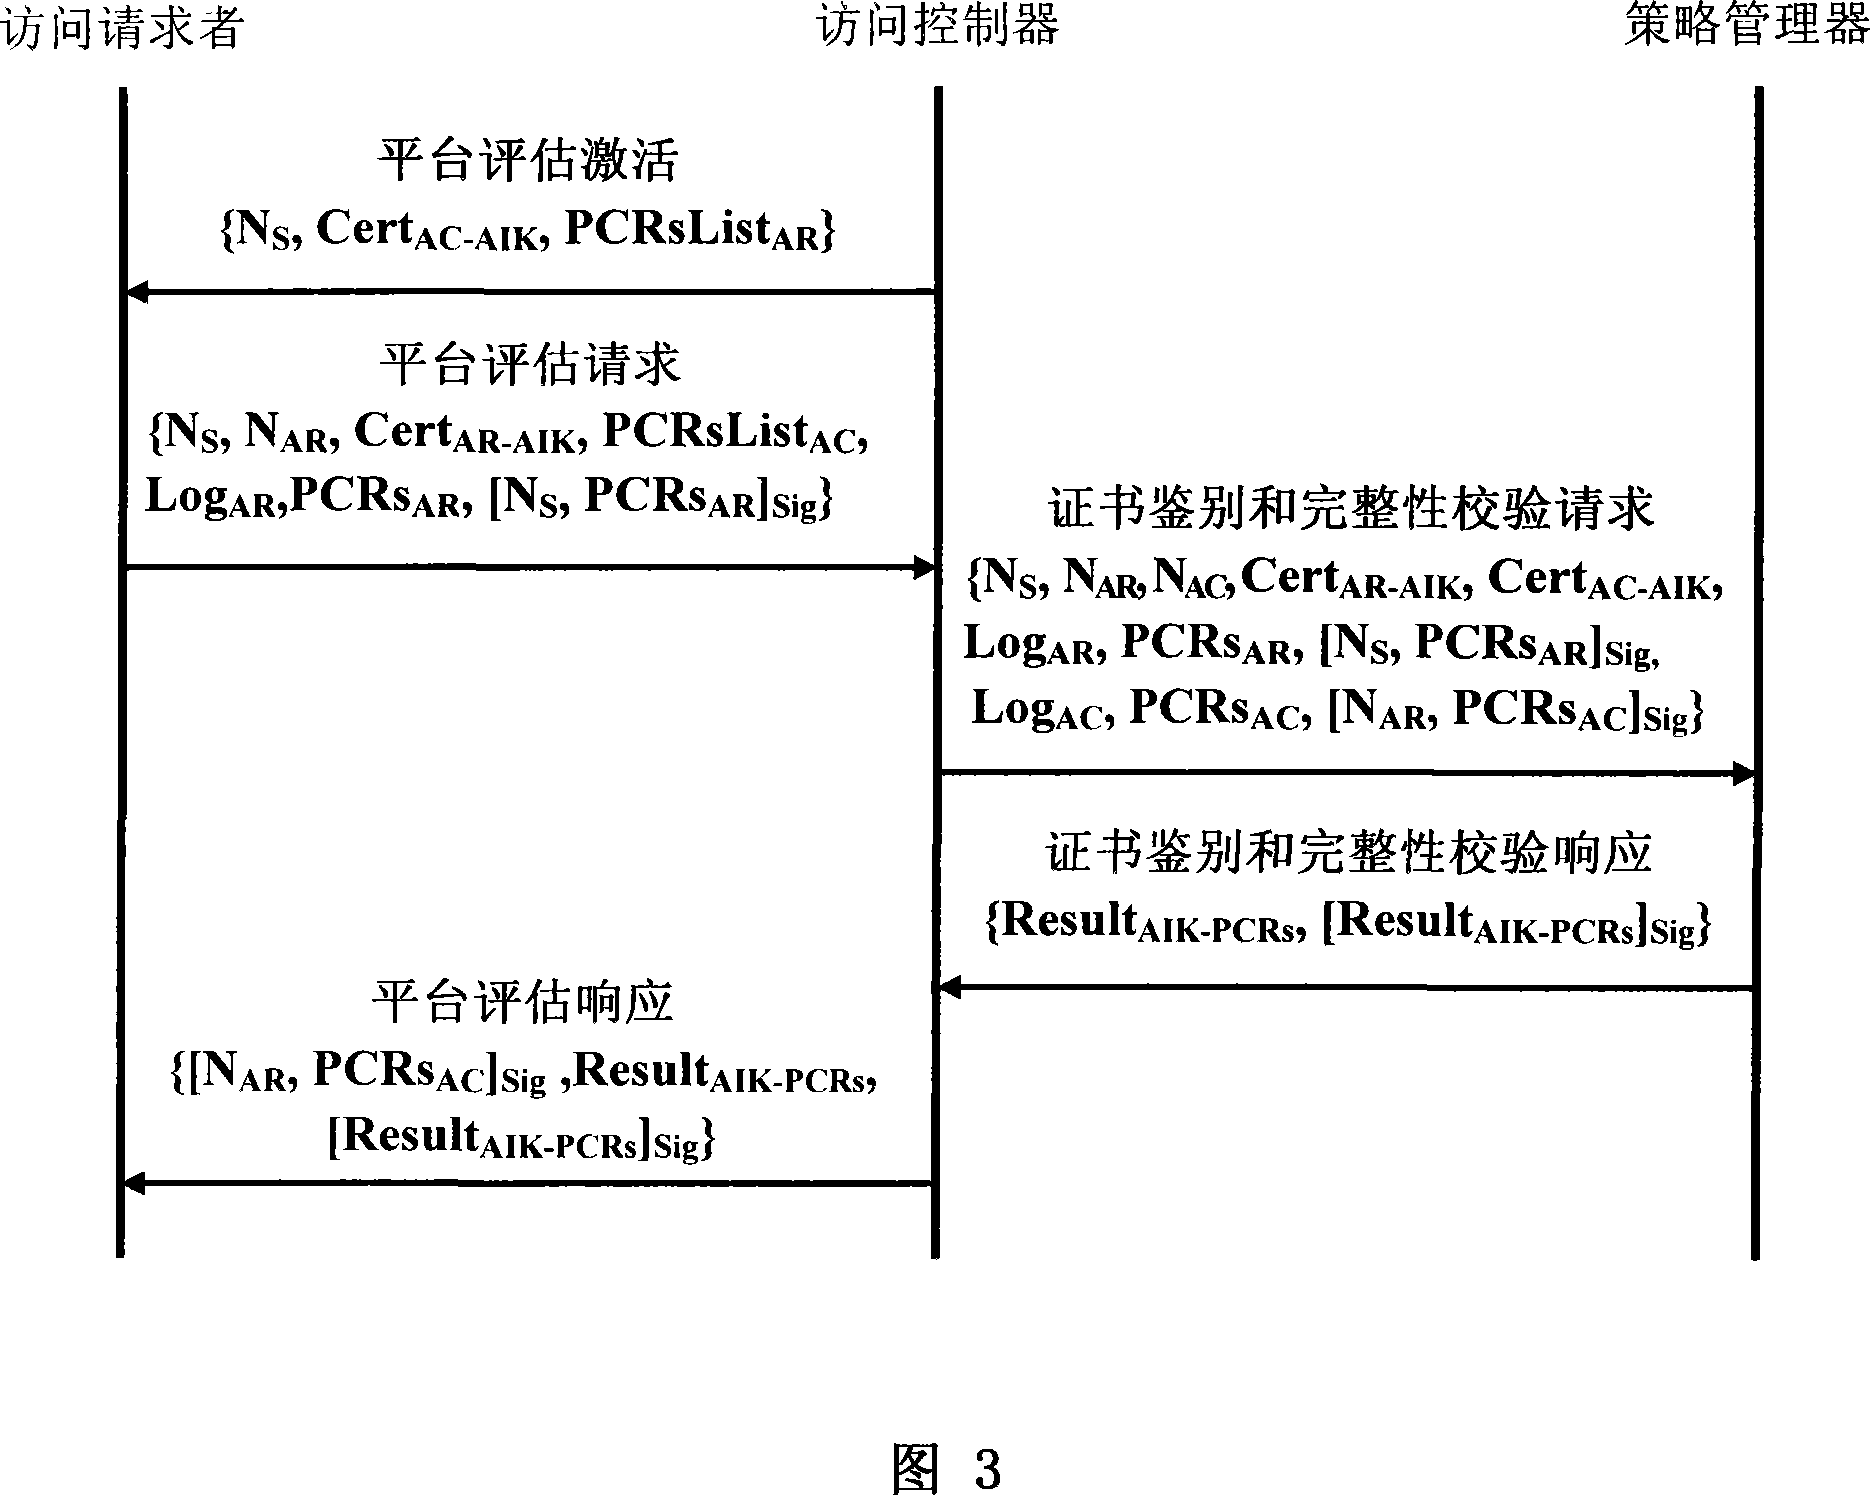 A trusted network connection method based on three-element peer authentication